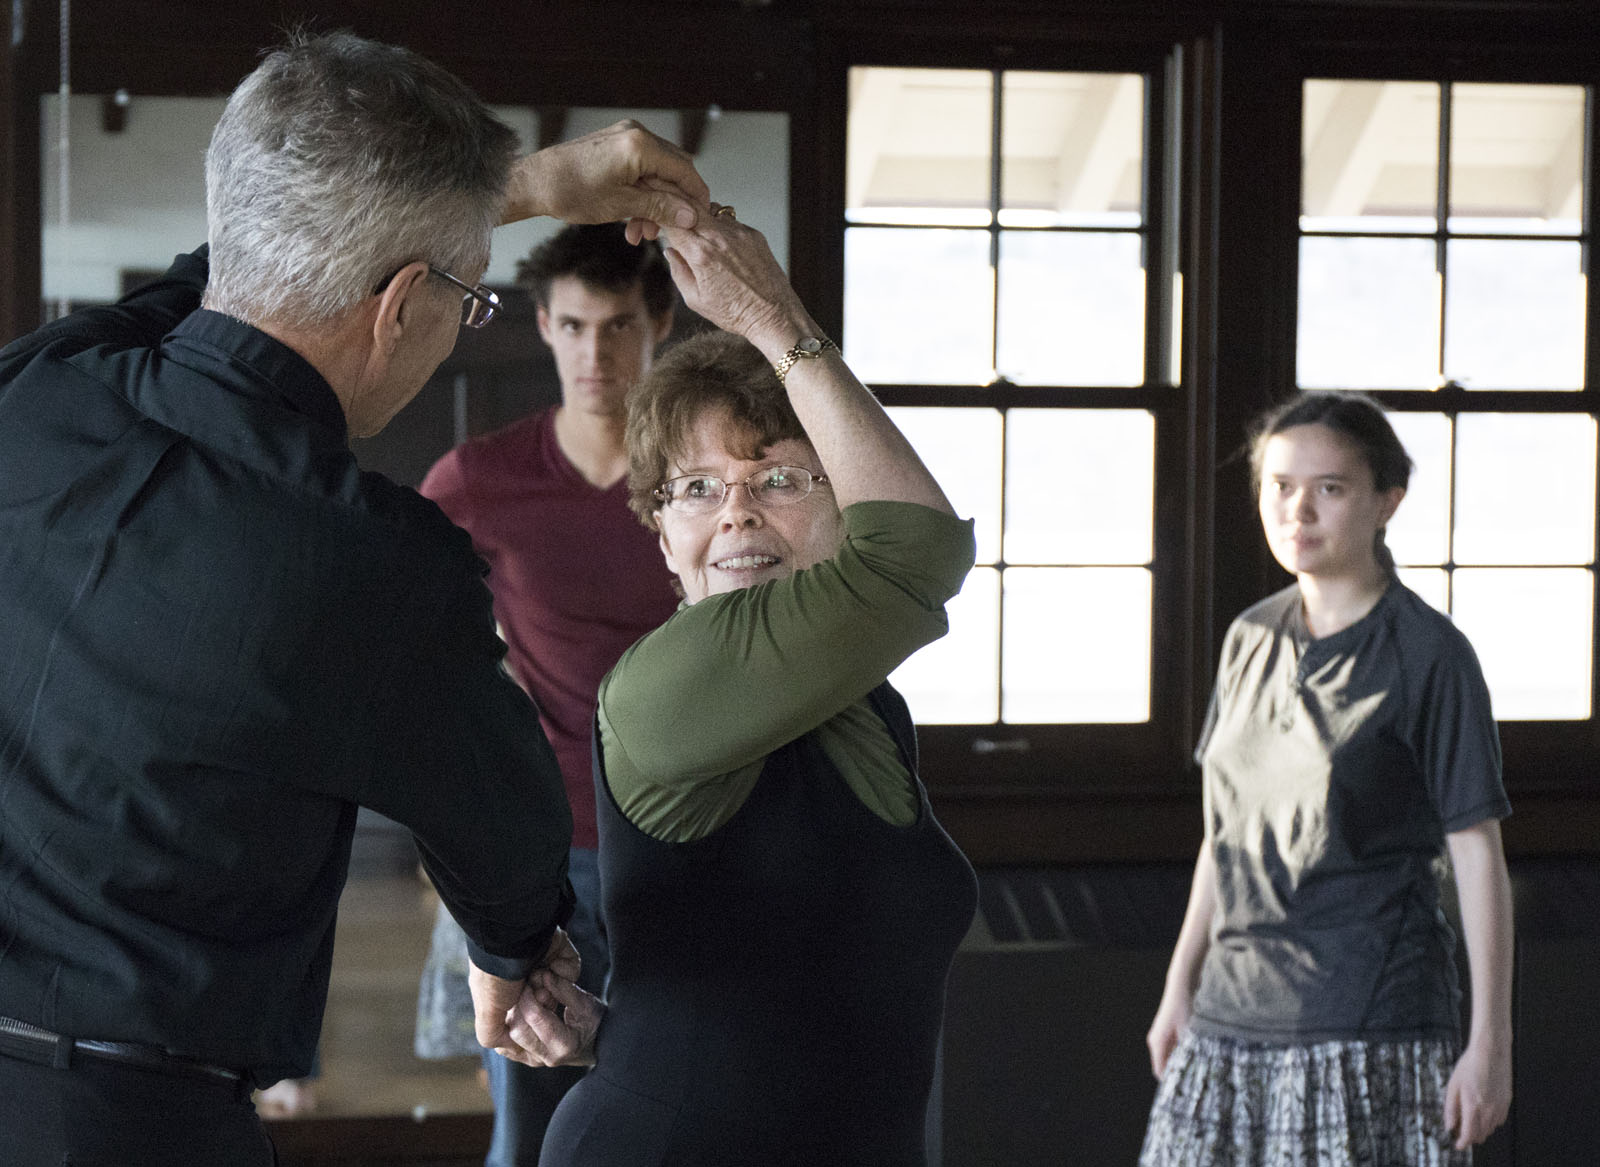 Marcia Dobson and John Riker teach a ballroom dancing class in Cossitt Hall that is open to students and staff alike. The class focuses on dance techniques for various dance styles. Soren Kodak '21 and Greta Wu '19 watch a technique being demonstrated.